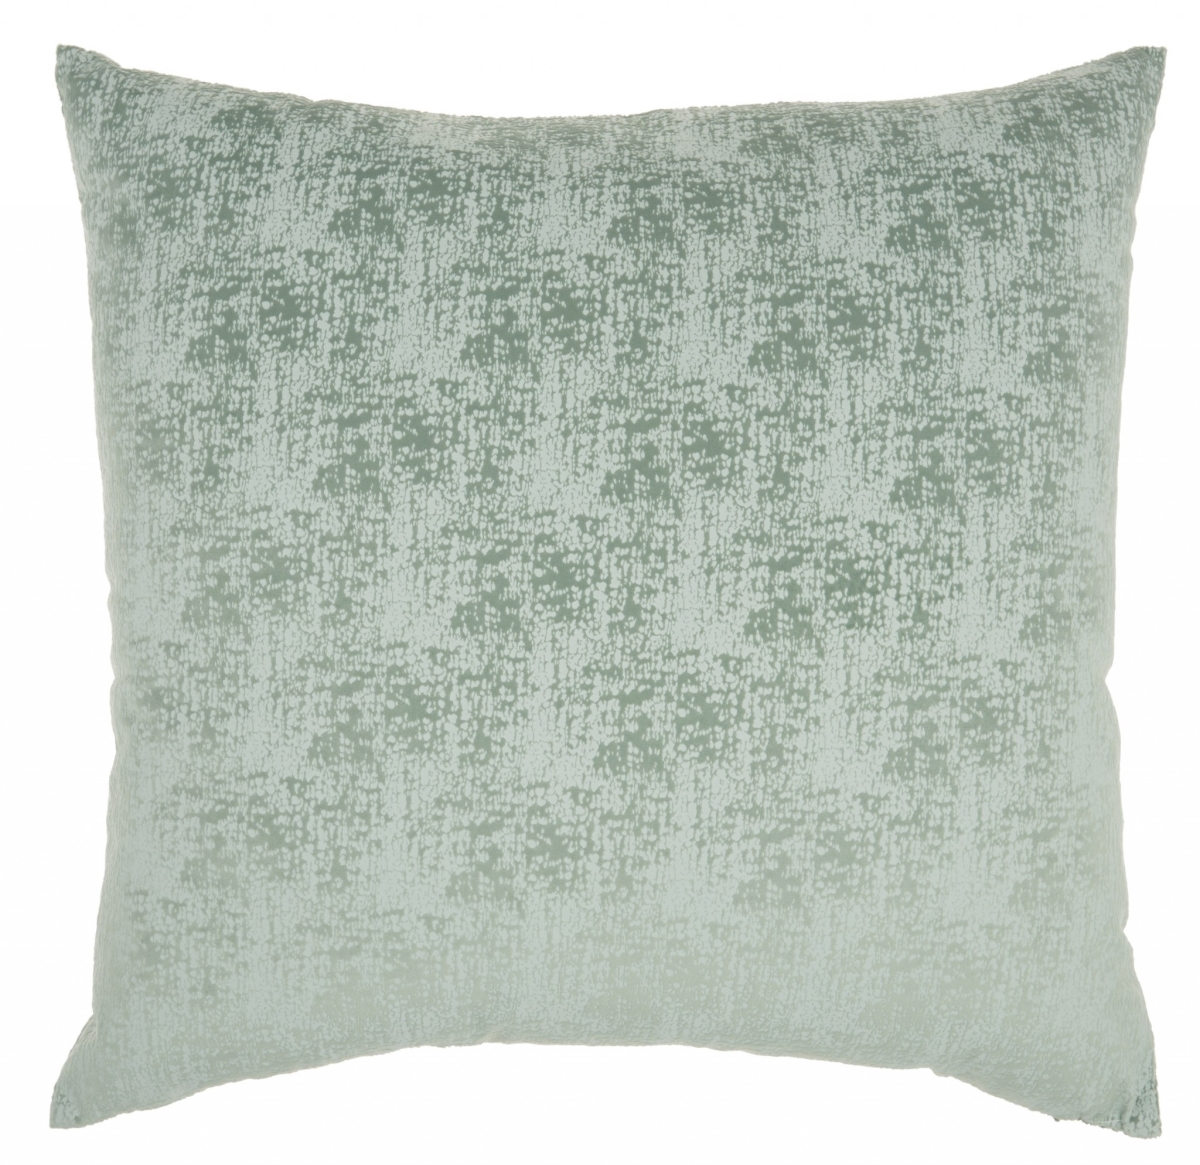 Picture of Homeroots 386154 22 x 22 in. Distressed Gradient Throw Pillow, Pale Green